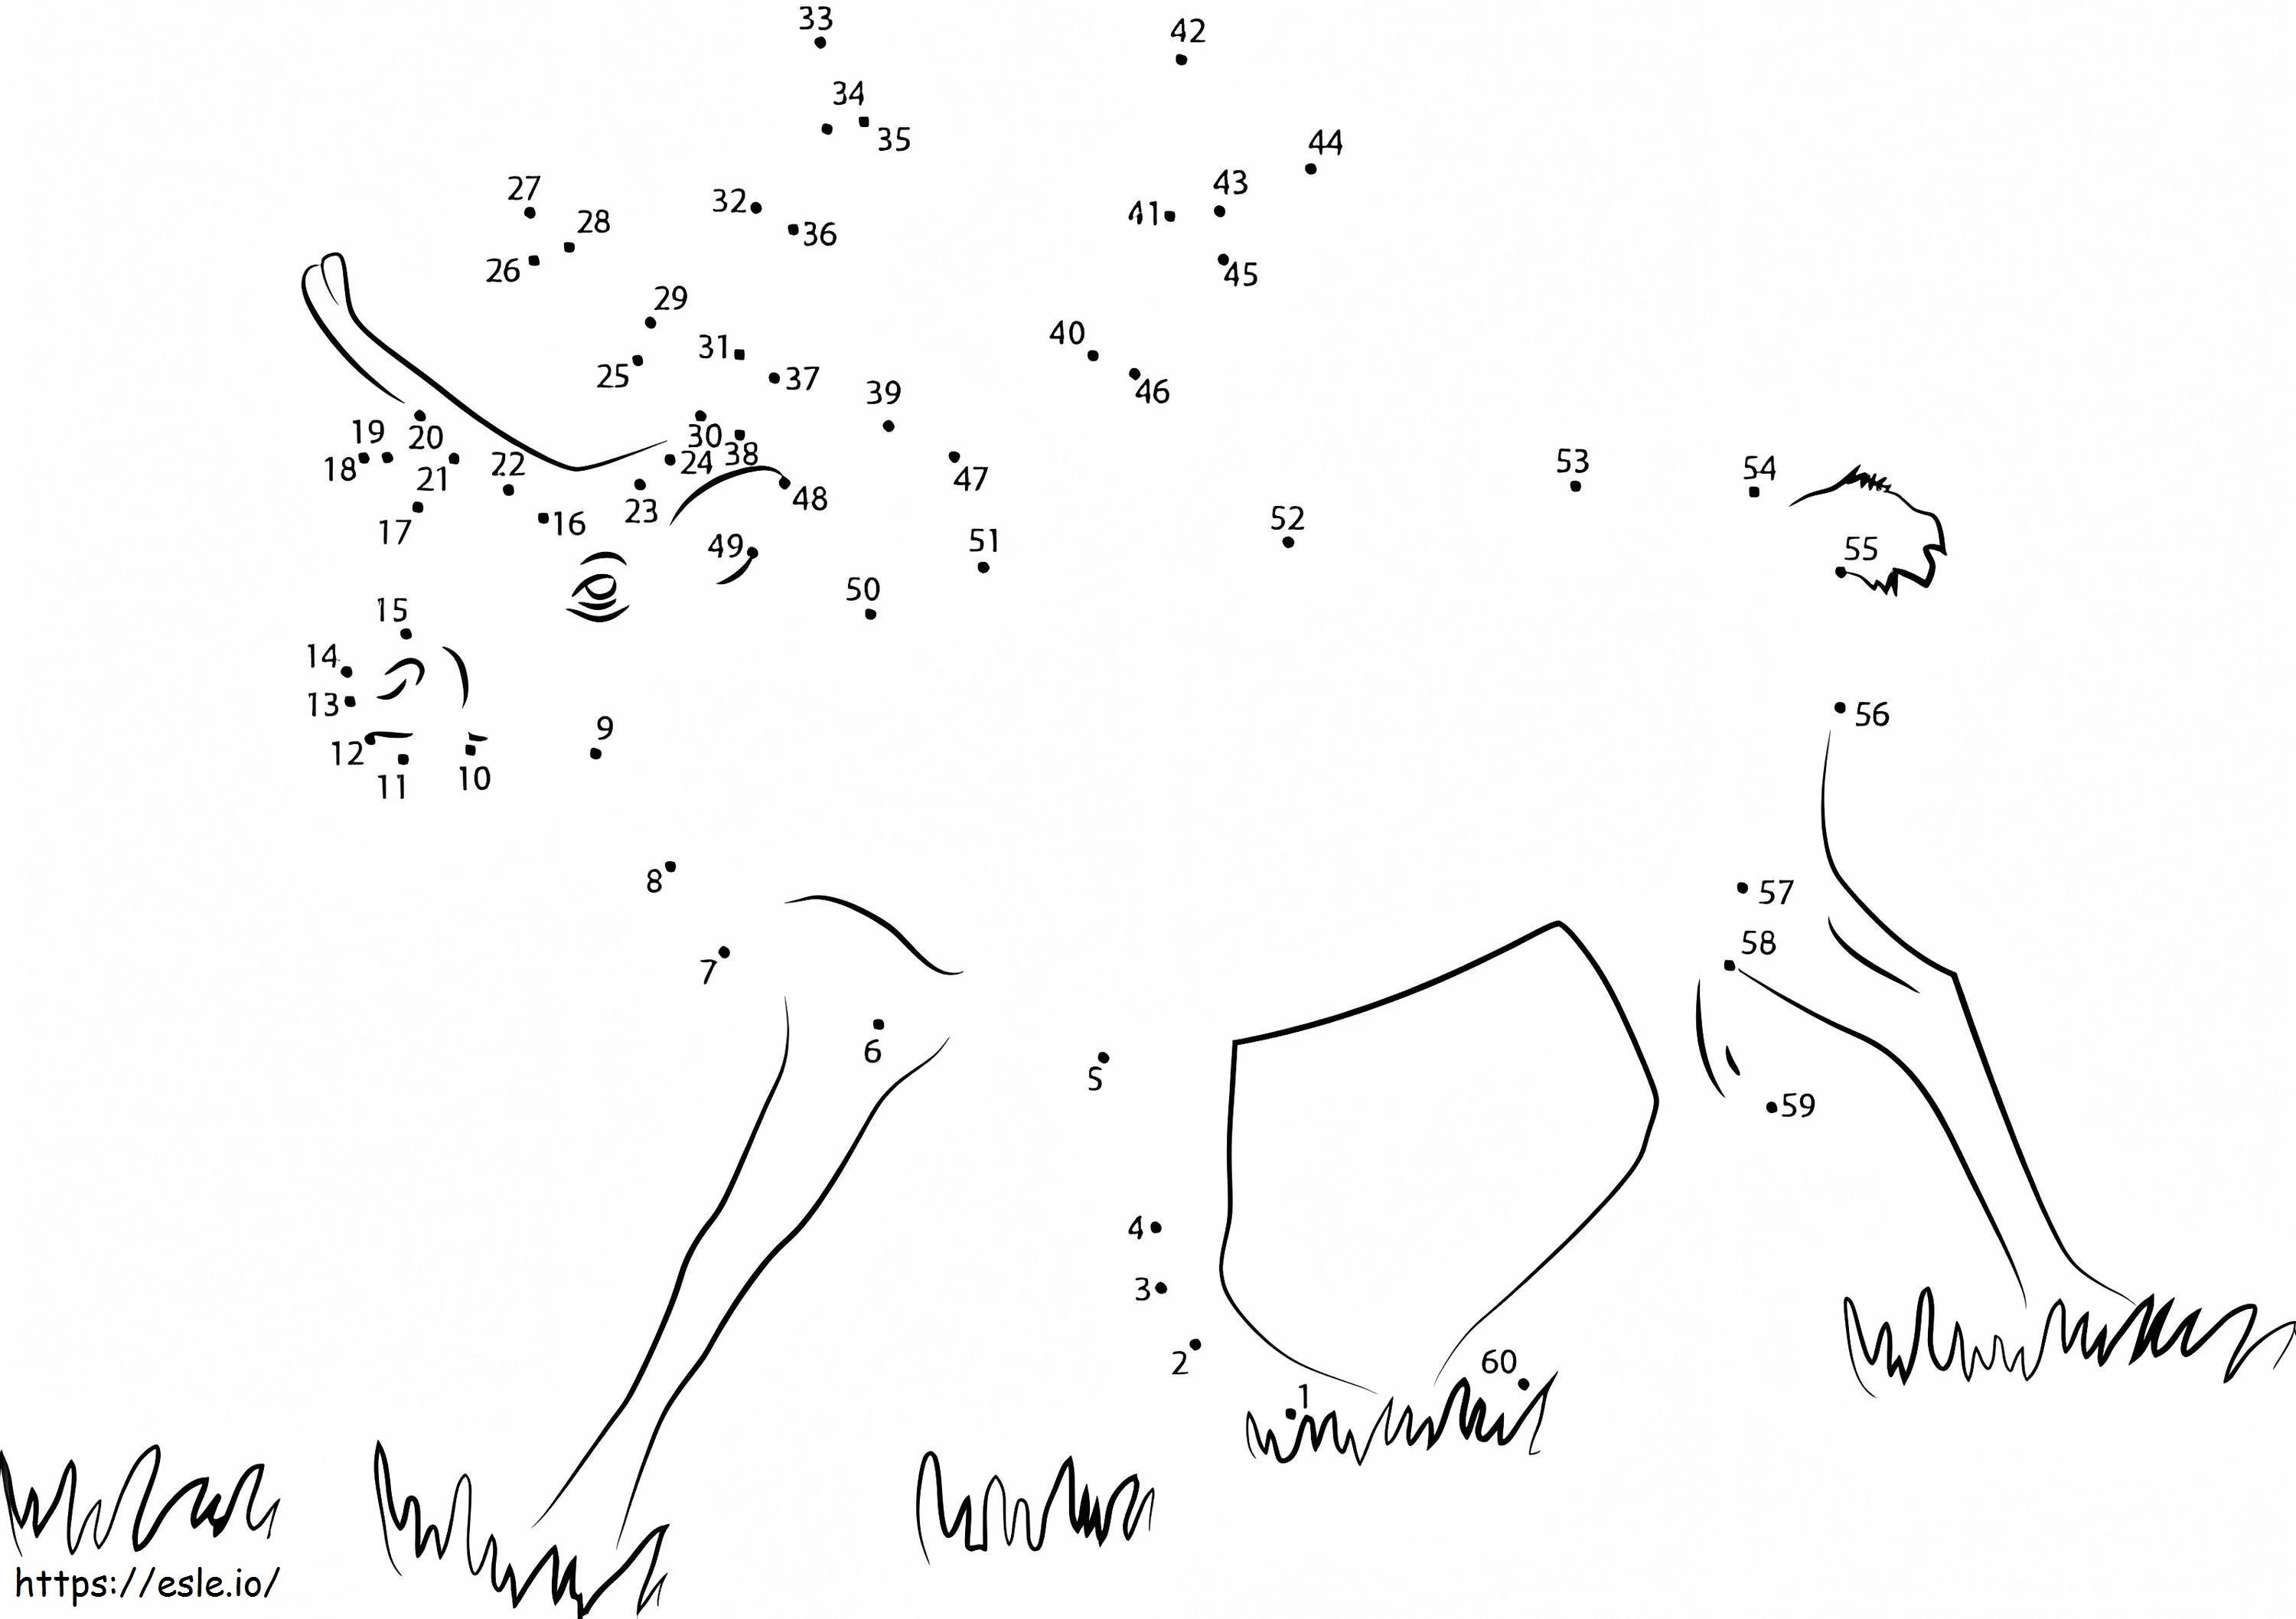 Running Reindeer Dot To Dots coloring page